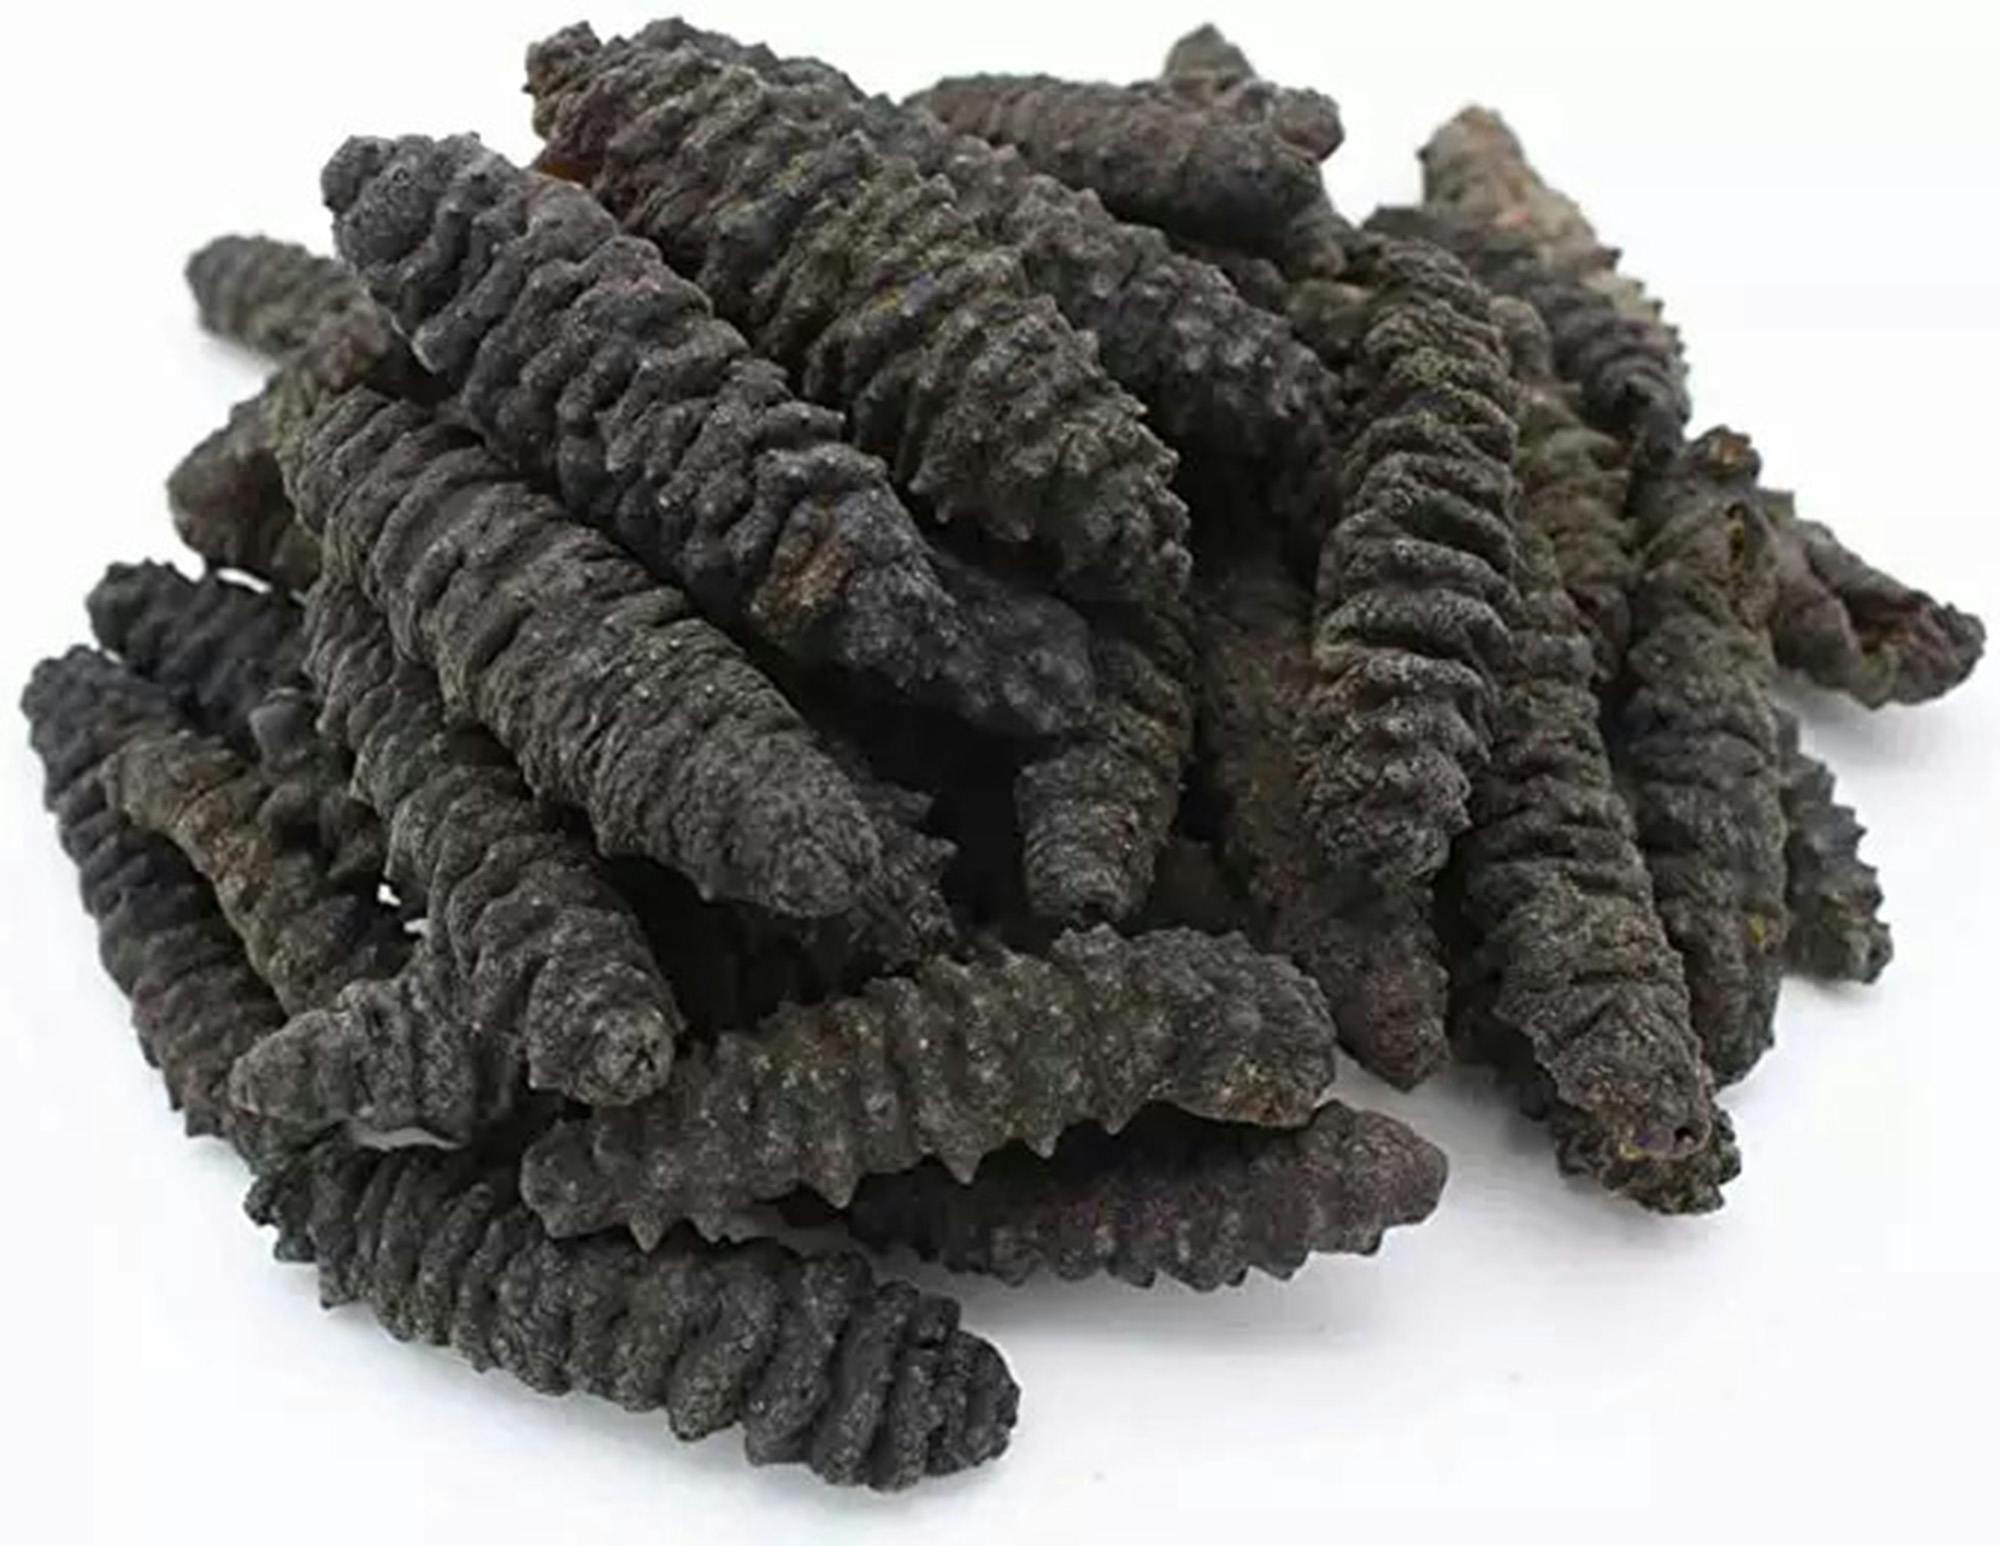 Dried Sea Cucumber | Sea Cucumber exporters and supplier from Vietnam | Tanis Imex Co., Ltd